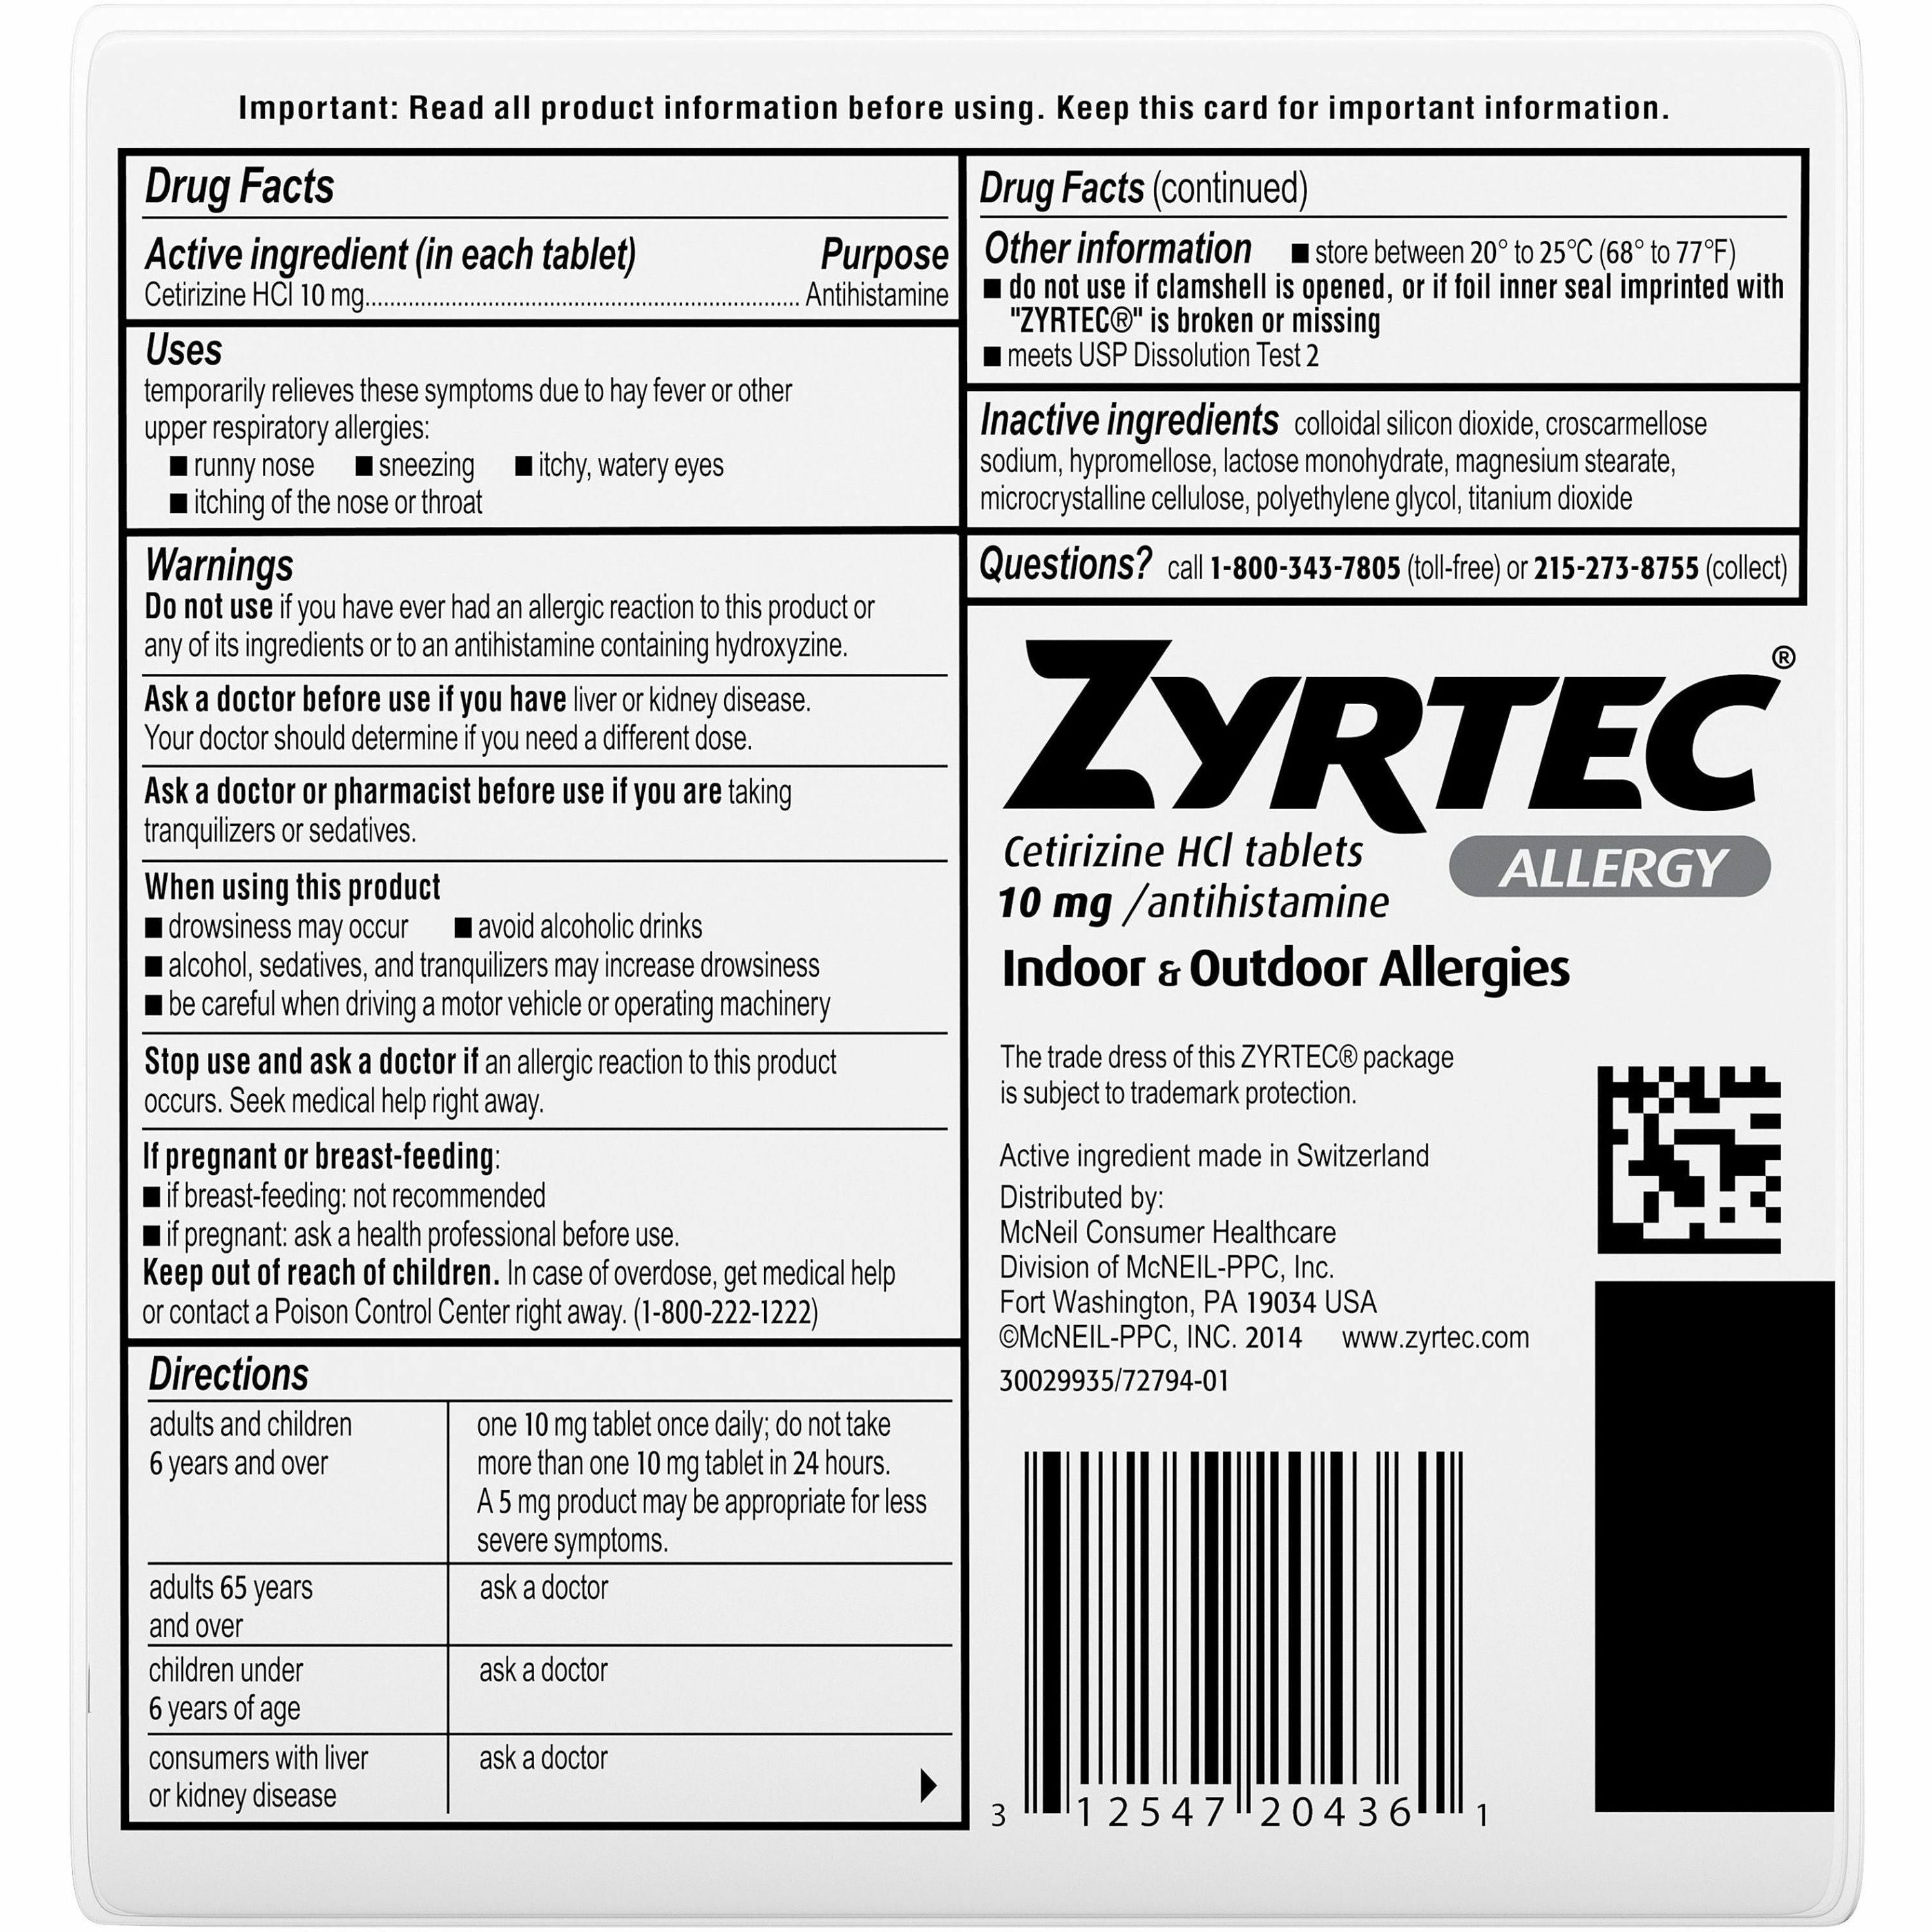 zyrtec-allergy-tablets-for-runny-nose-sneezing-itchy-throat-30-box_joj20436 - 3